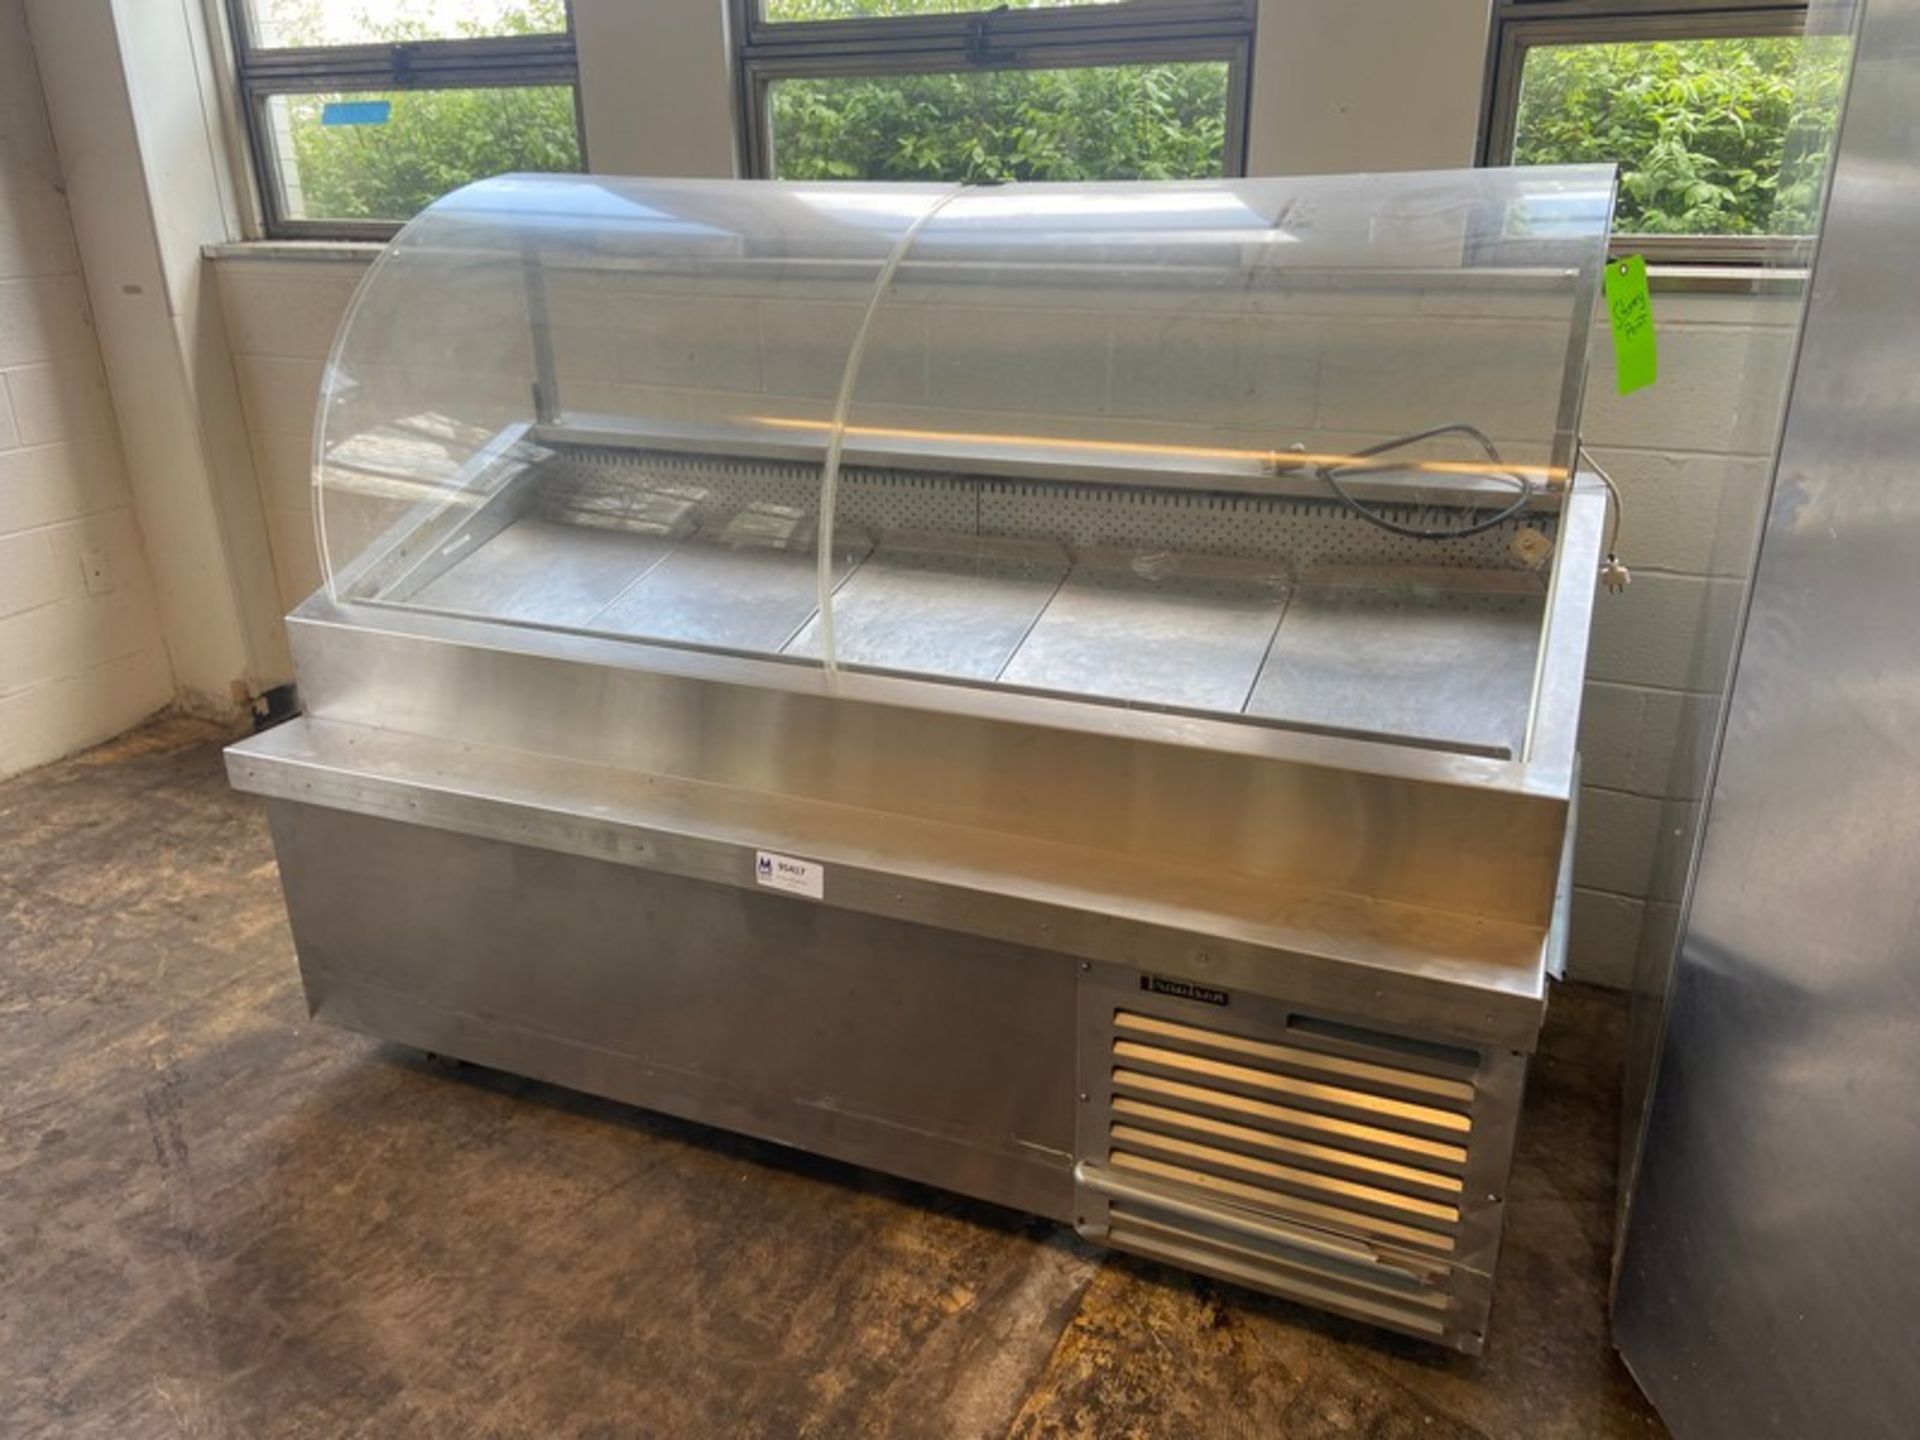 Traulsen Refrigerated Display Case Overall Dims.: Aprox. 80" L x 36" W x 59" H, with S/S Bottom (